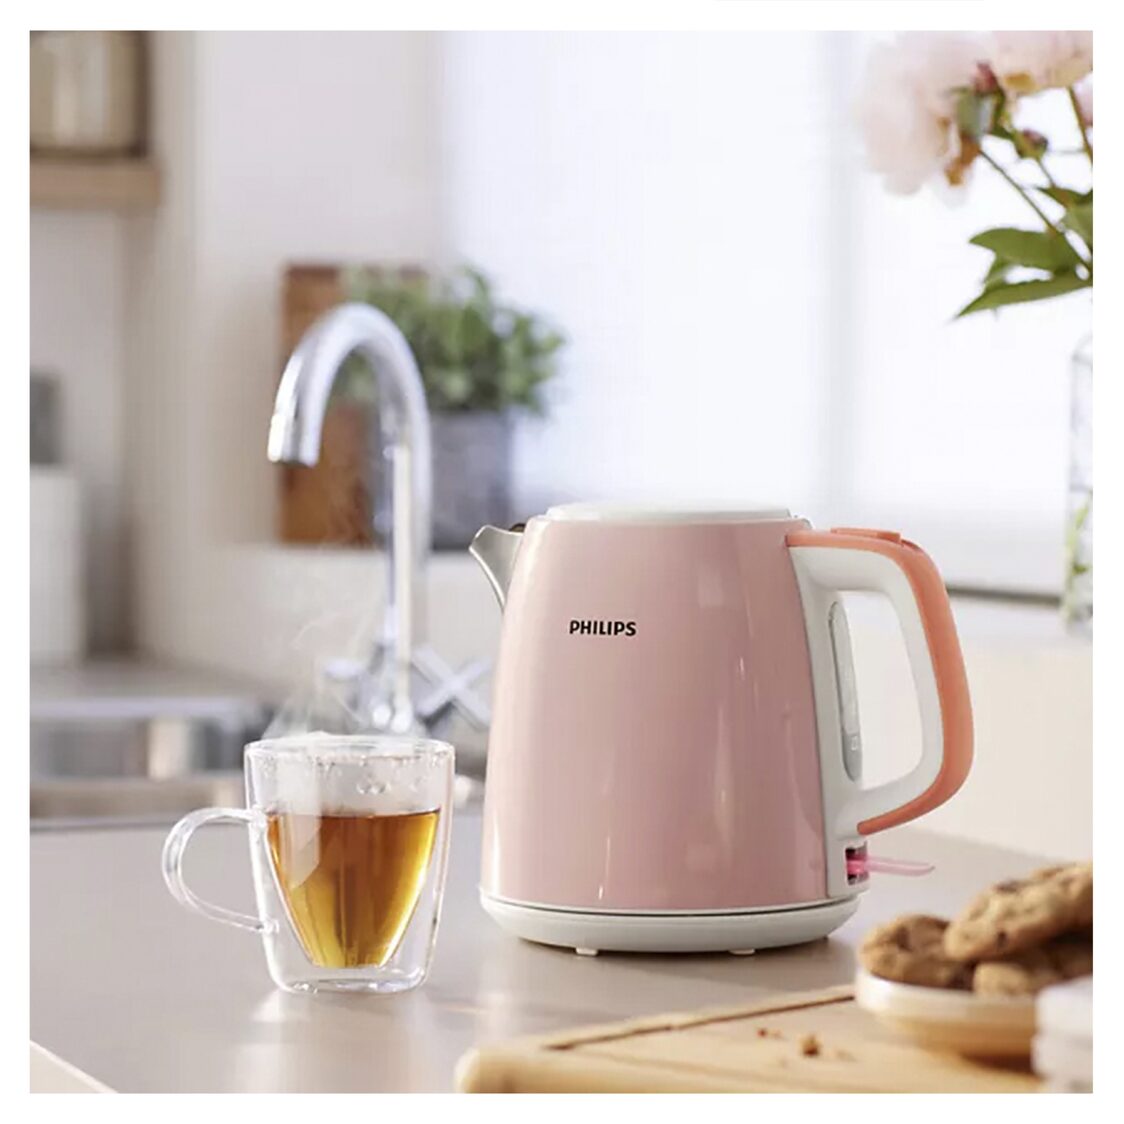 https://media.metro.sg/ProductImages/732a7b79-6d2e-4d99-a5e0-d6a2ff541ffc/7/std/philips-daily-collection-stainless-steel-kettle-1l-pink-hd934858-230803113329.jpg